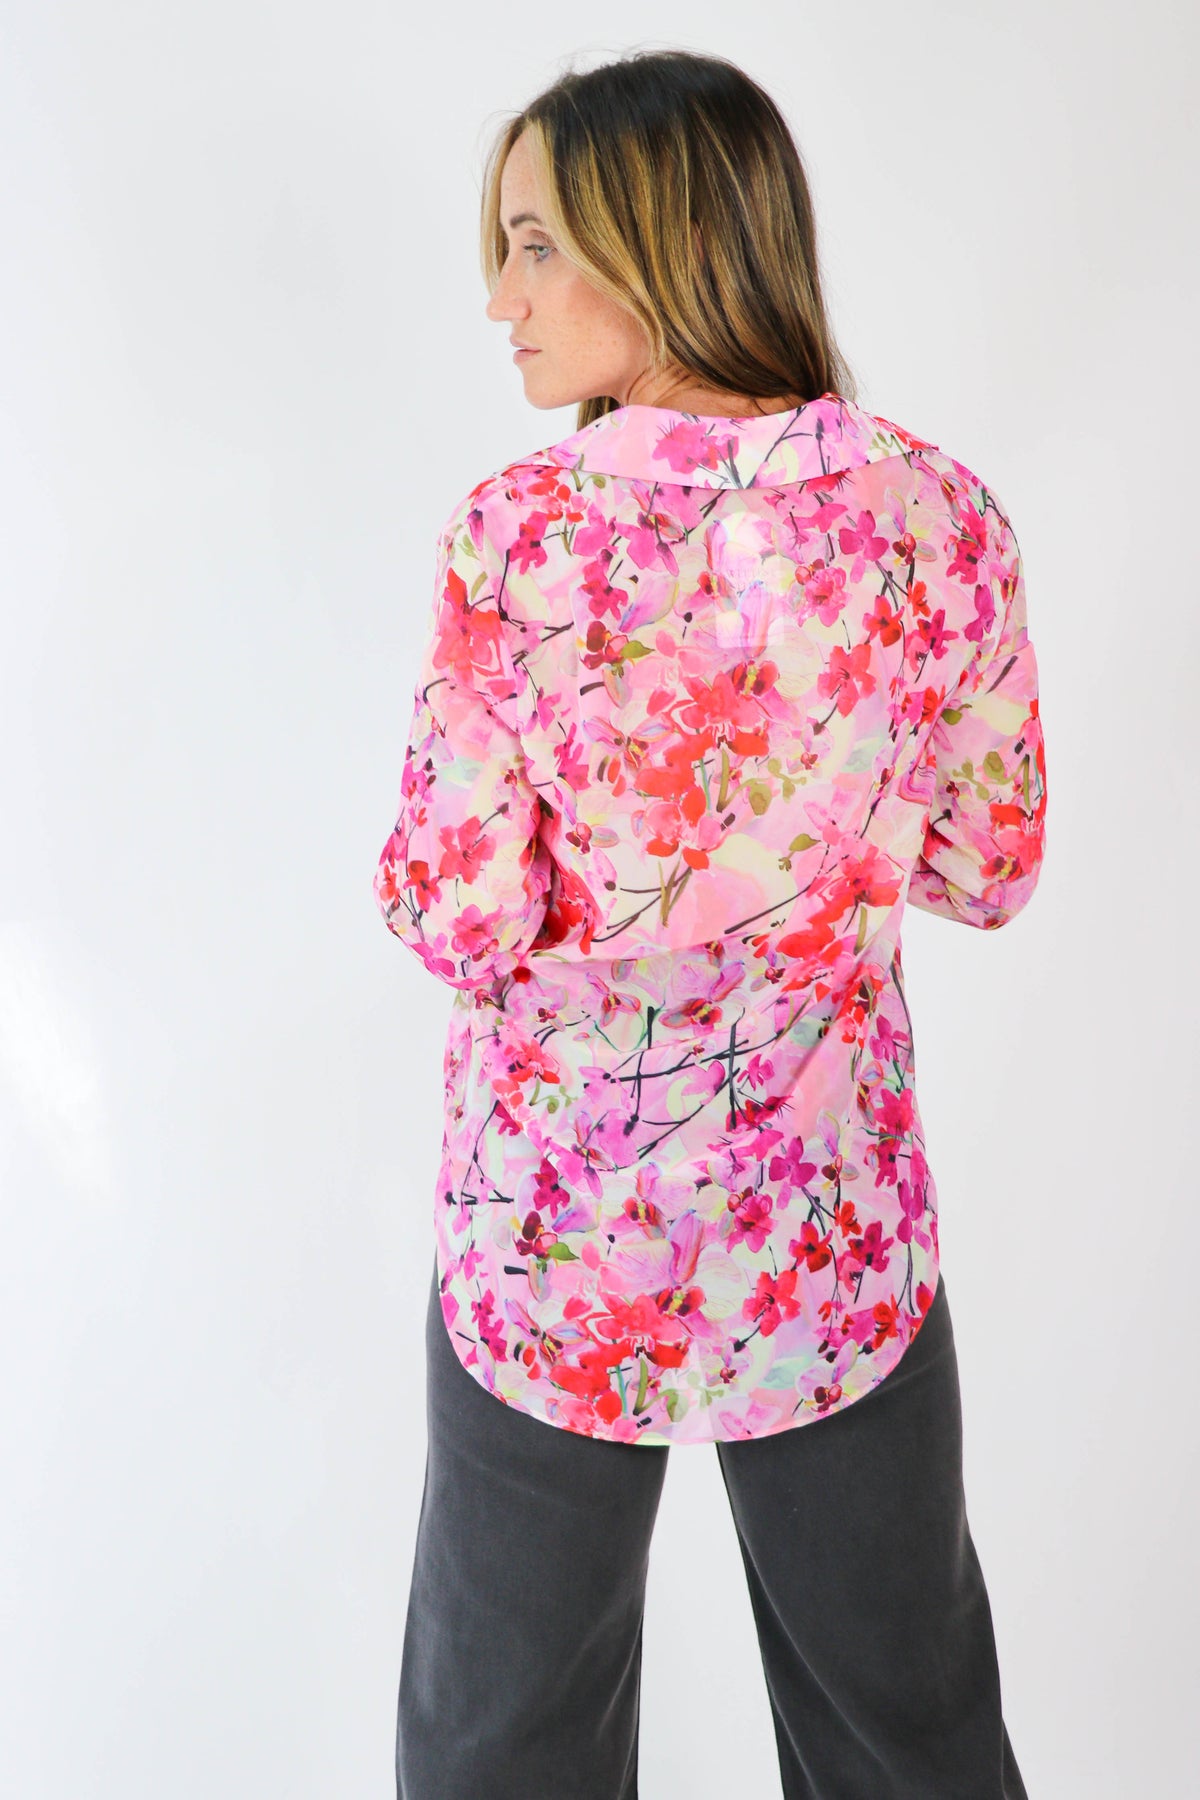 Sheer Bright Floral Button Down Top for Women | Sweetest Stitch